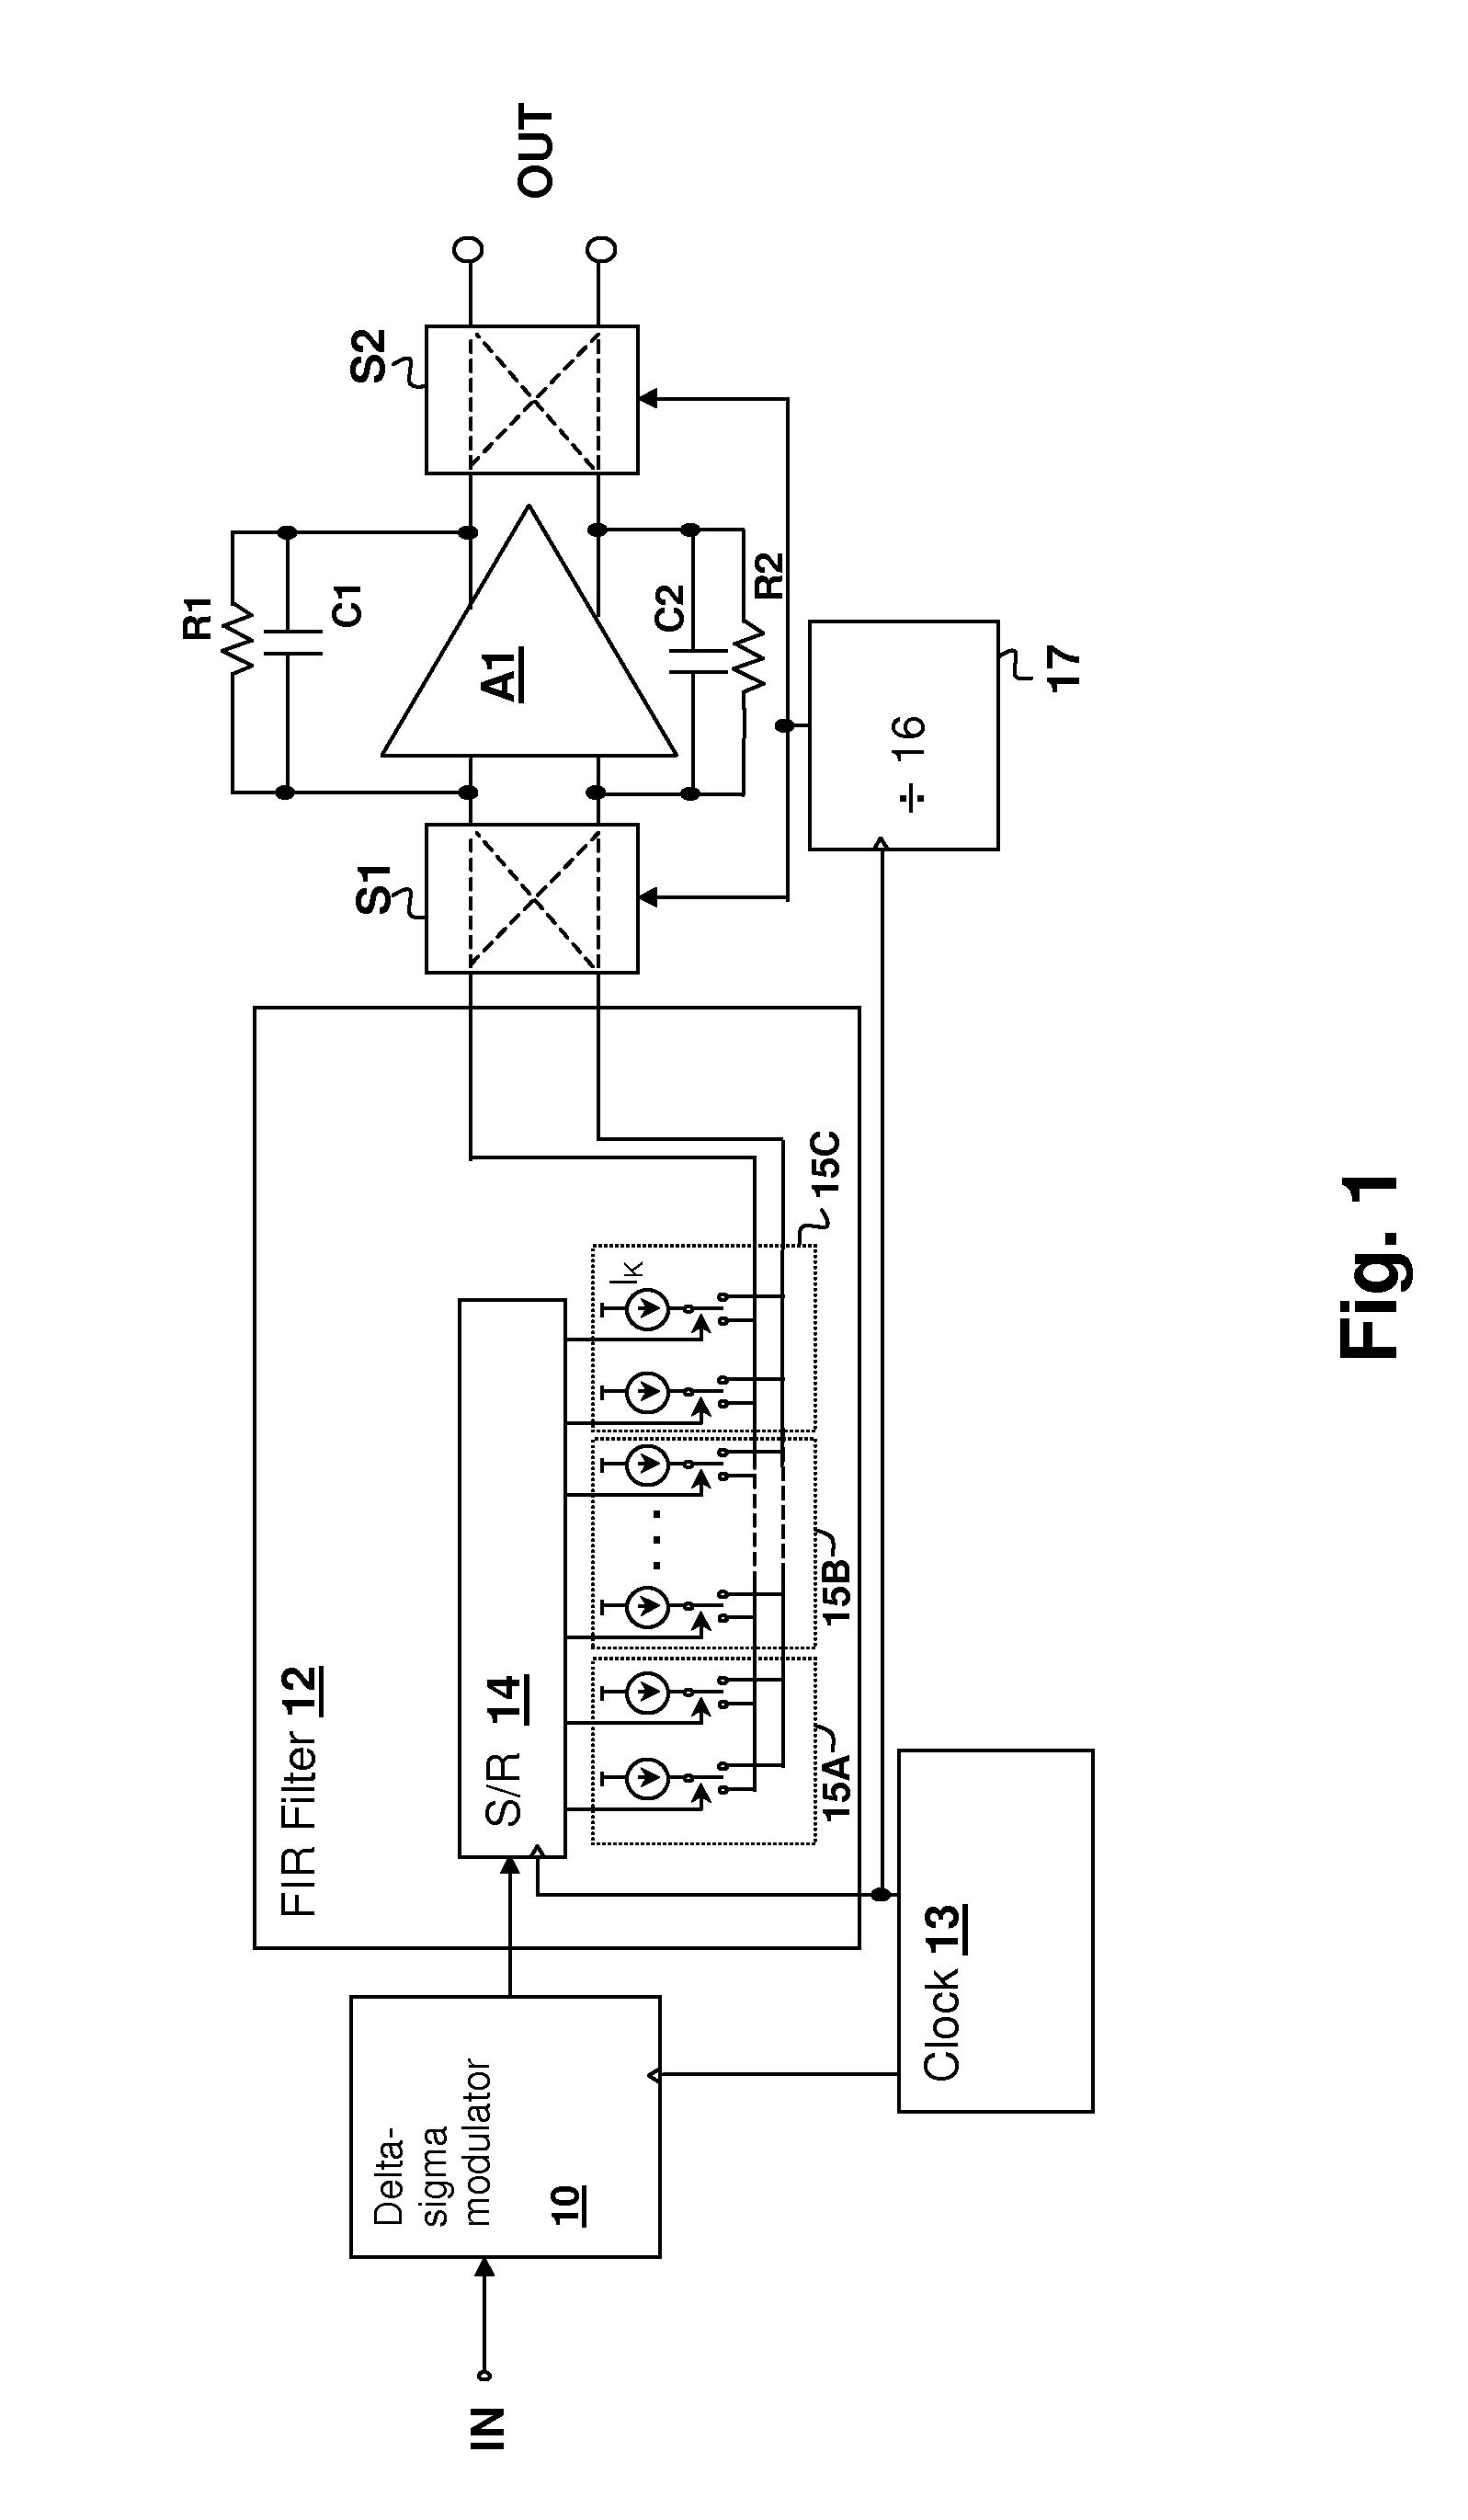 Method and apparatus for reducing noise in a digital-to-analog converter (DAC) having a chopper output stage